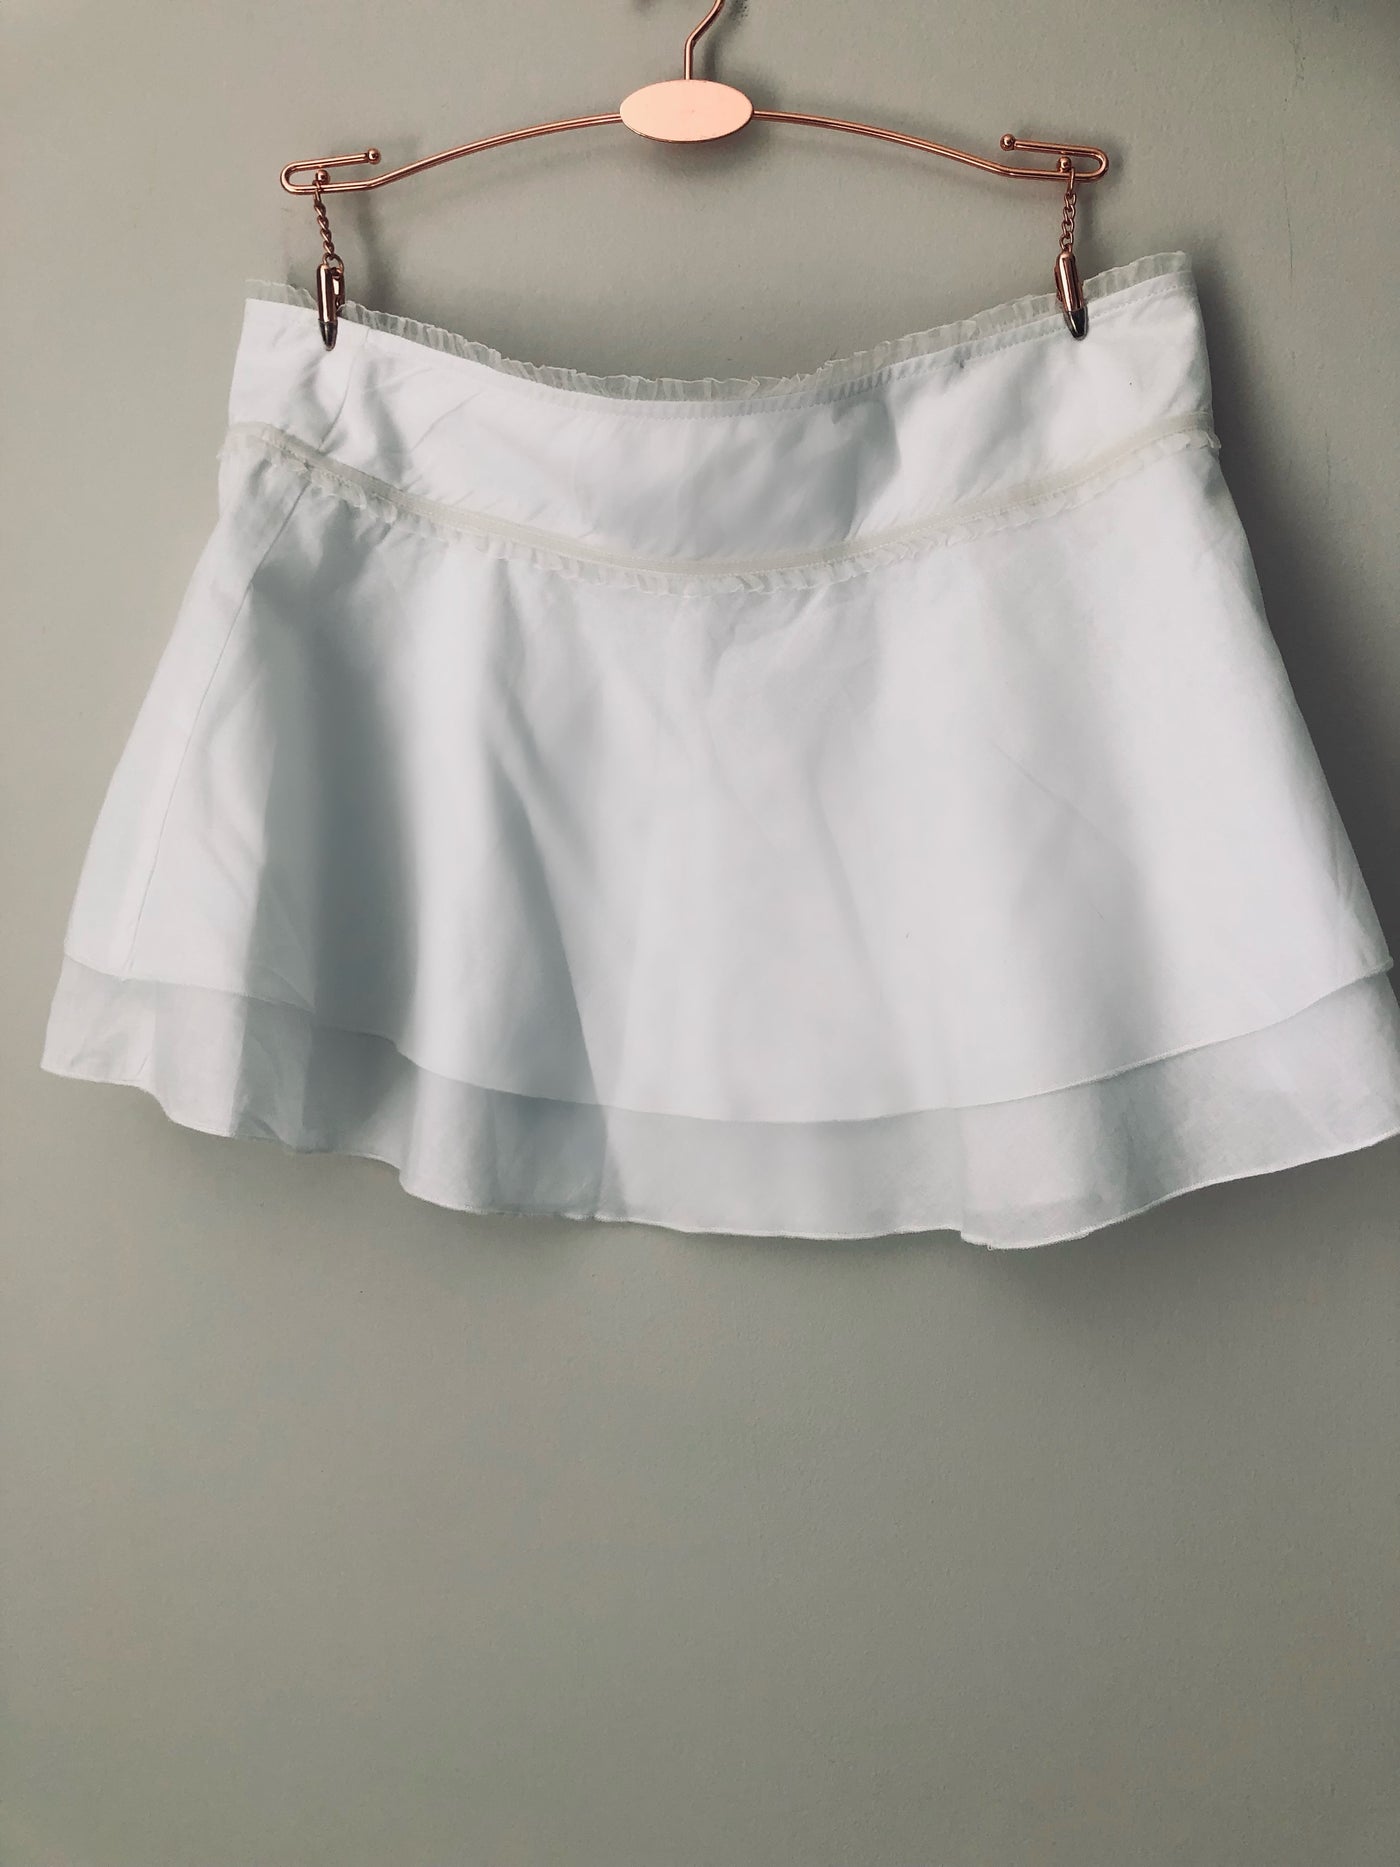 White Janet Reger tennis skirt with frilly panty